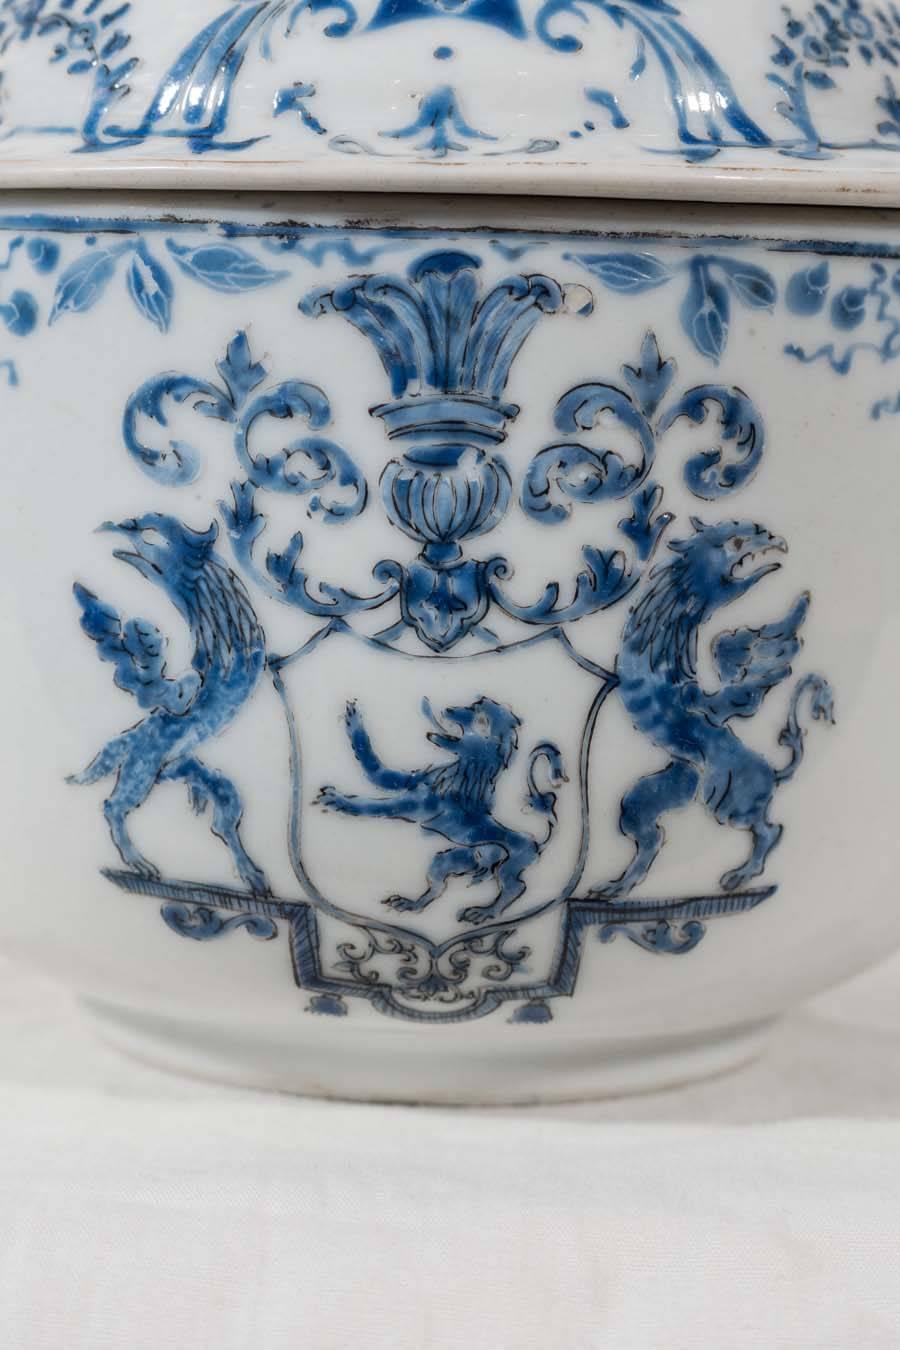  Chinese Blue and White covered jar decorated in rare overglaze blue enamels with a coat of arms. The arms feature a lion rampant with griffin supporters, and a crest of three ostrich feathers coming out of a crest coronet. Most likely these arms